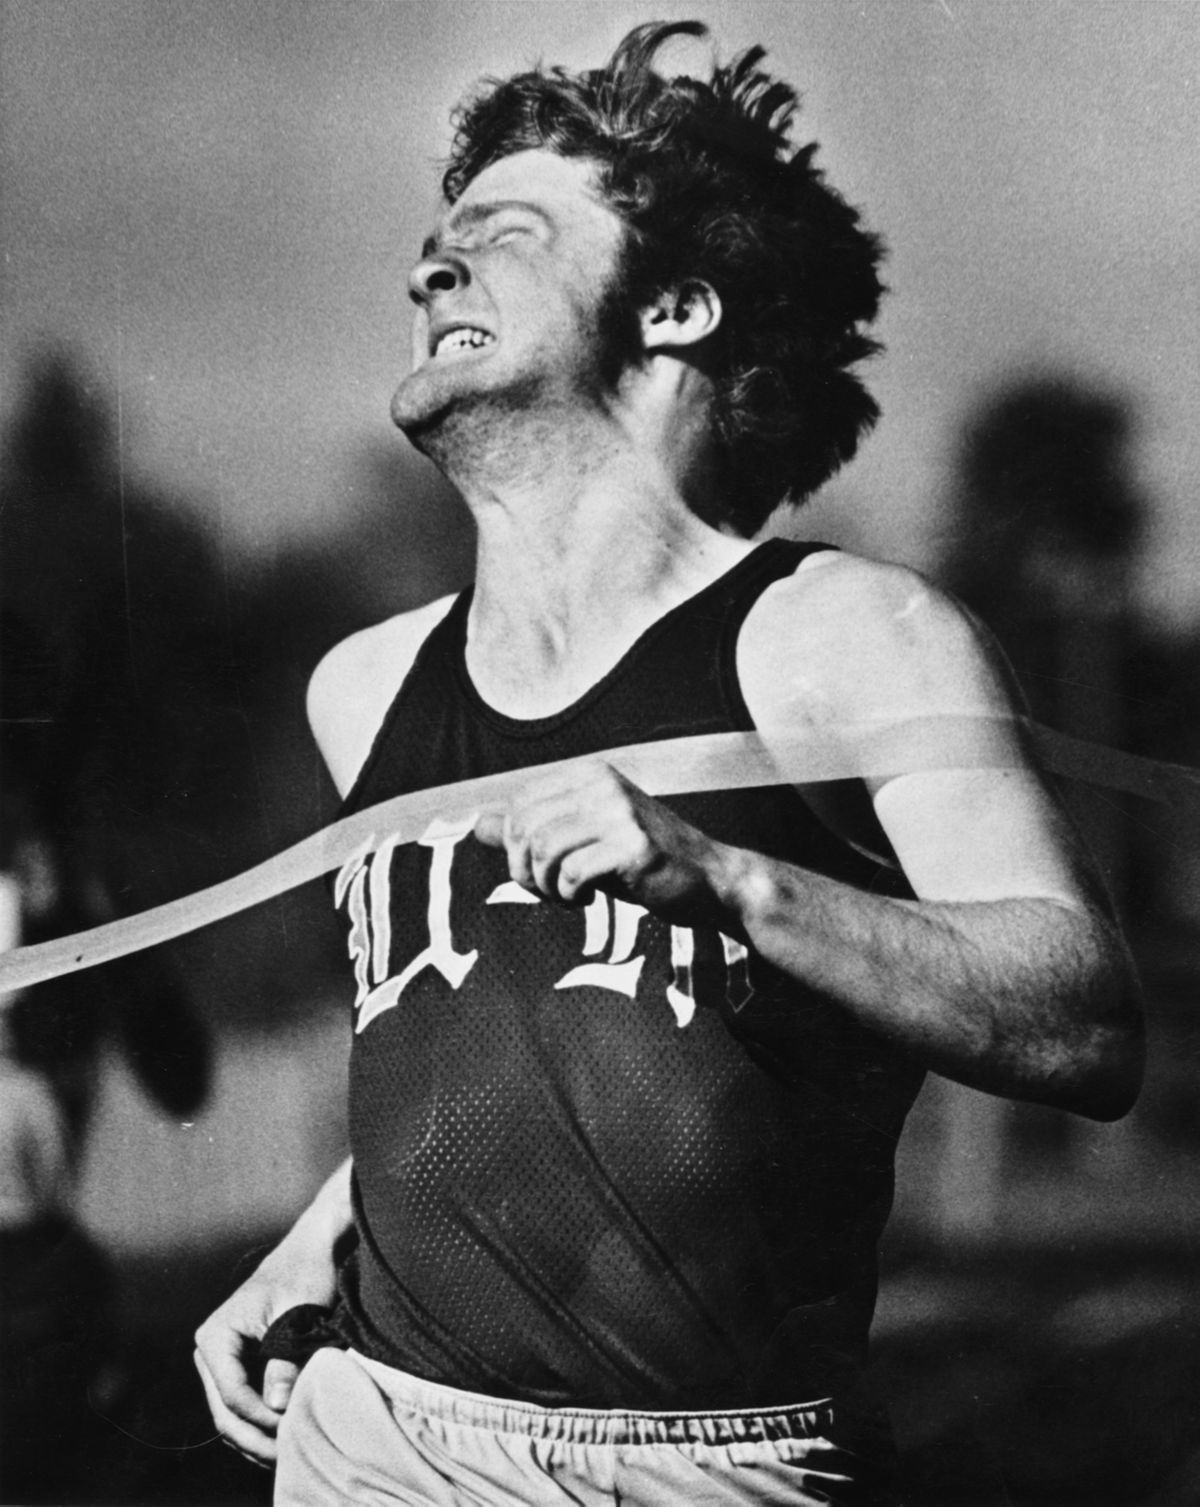 Then: Erik Krauss won the state 4A title in the 100 meters in 1979 for University High. (FILE / The Spokesman-Review)